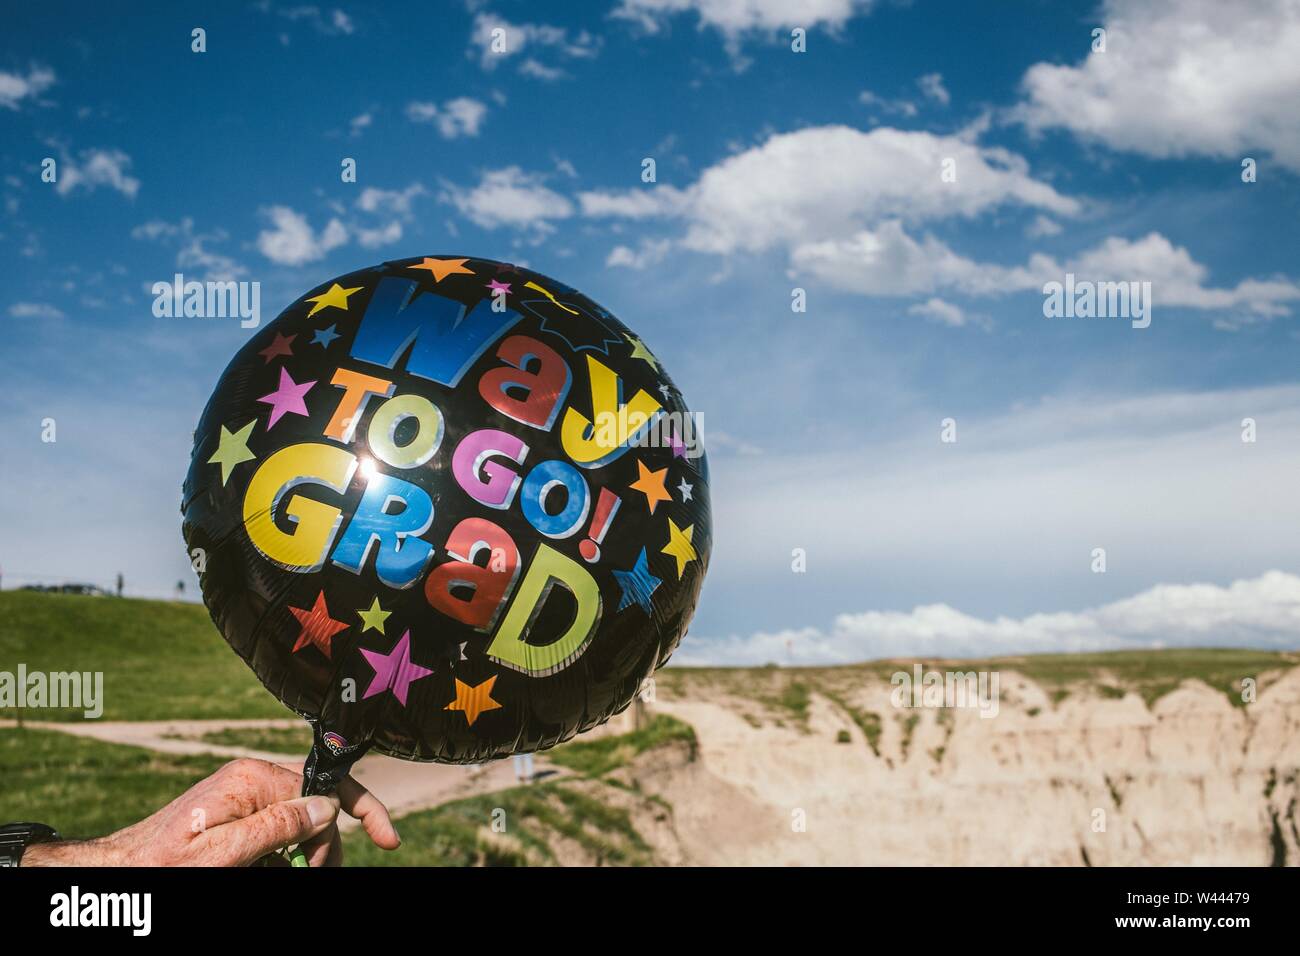 Closeup of a black balloon with a writing 'Way to go Grad' held by a person in the desert Stock Photo